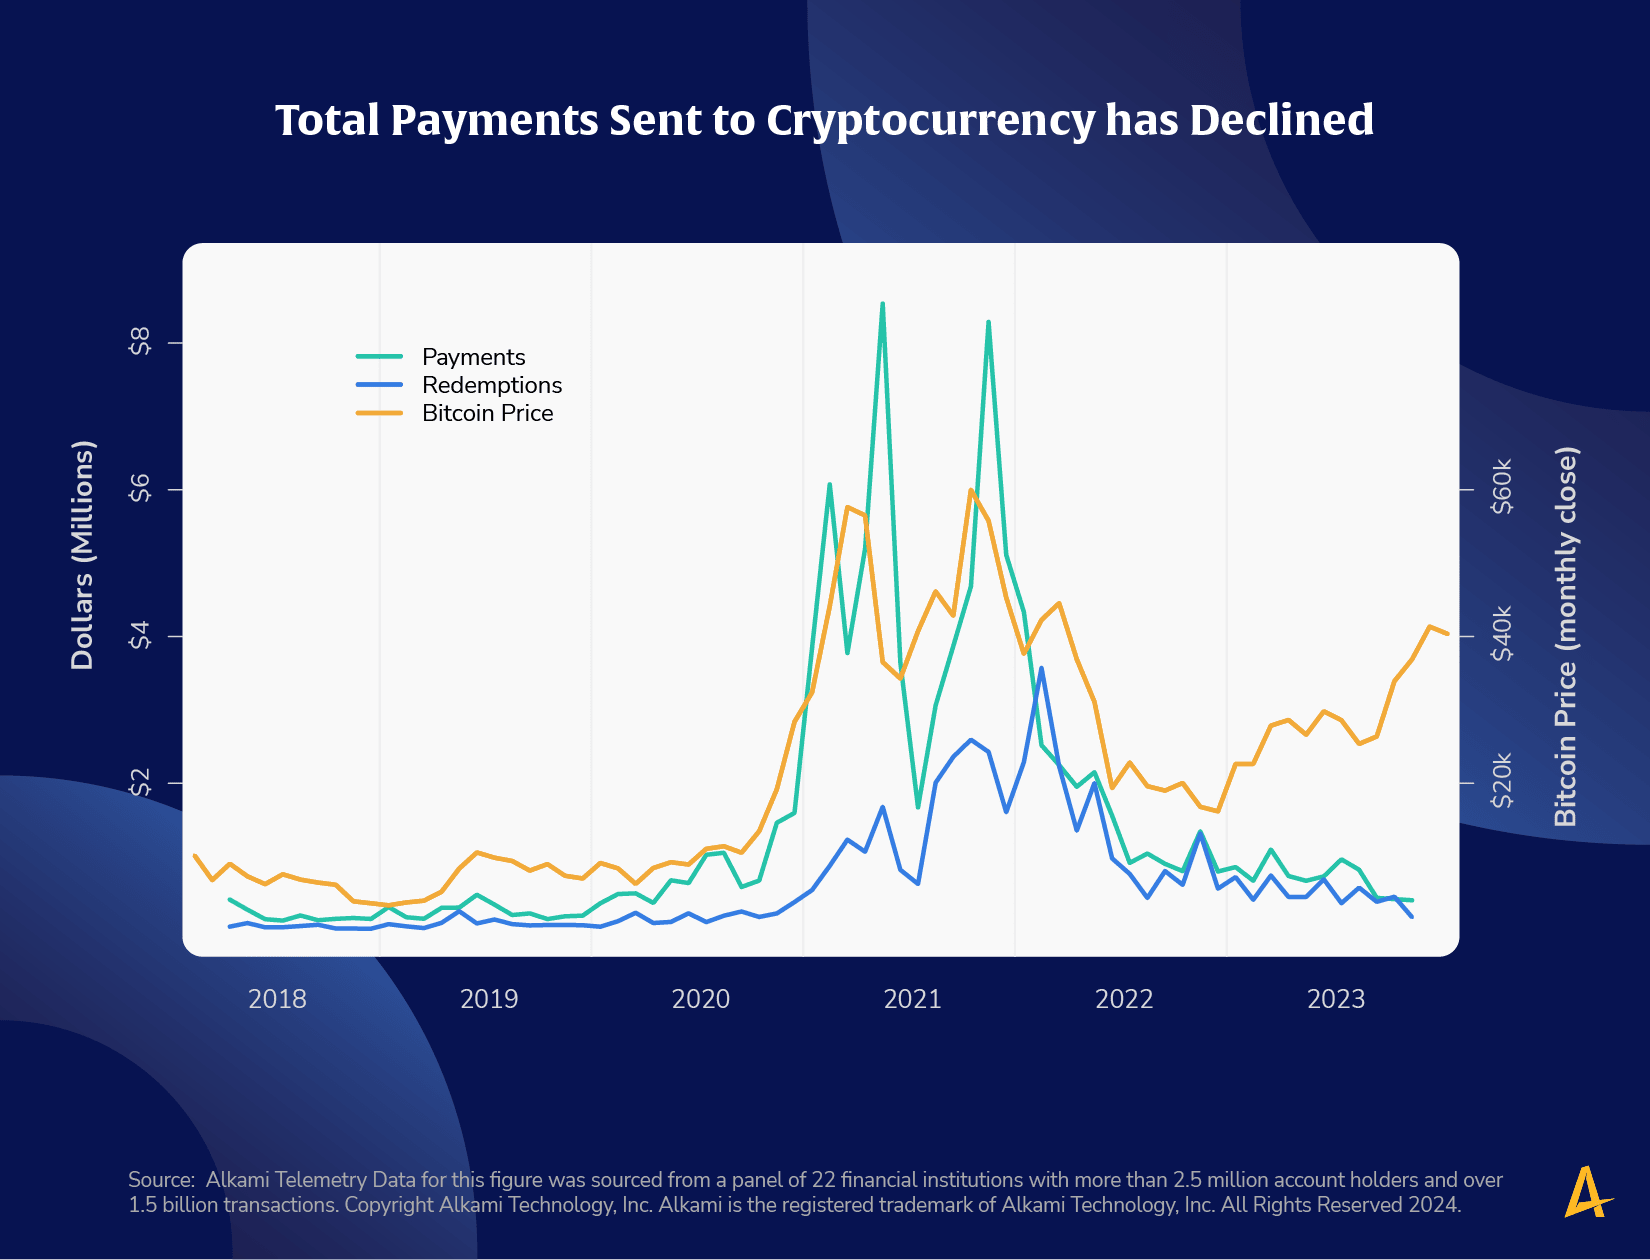 This image shows a chart titled “Total Payments Sent to Cryptocurrency has Declined”